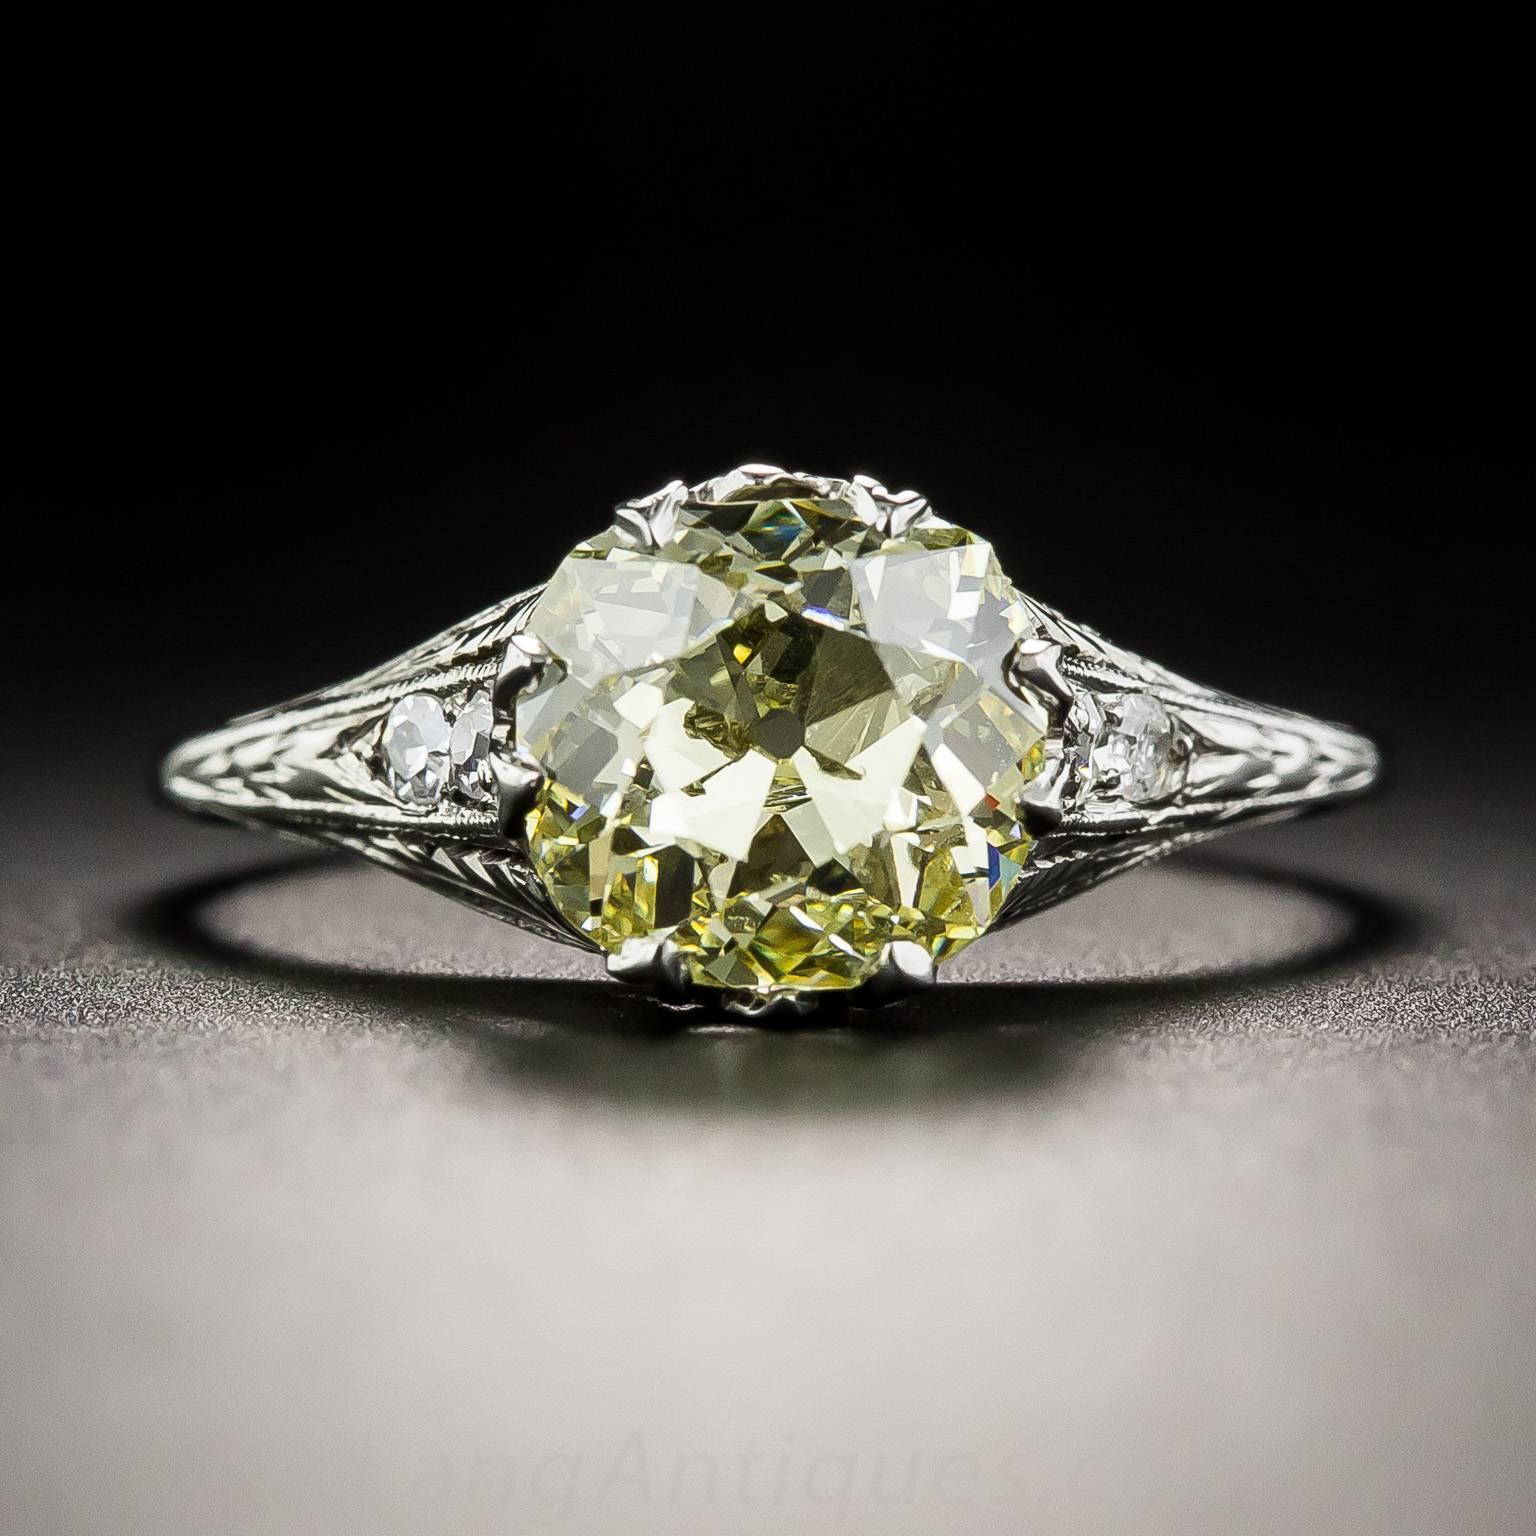 A beautiful bright sunshiny yellow antique cushion-cut diamond, weighing 2.02 carats (graded Fancy Intense Yellow - VS2 Clarity by the GIA) radiates from atop a refined, neoclassically inspired original Art Deco mounting, die-struck and